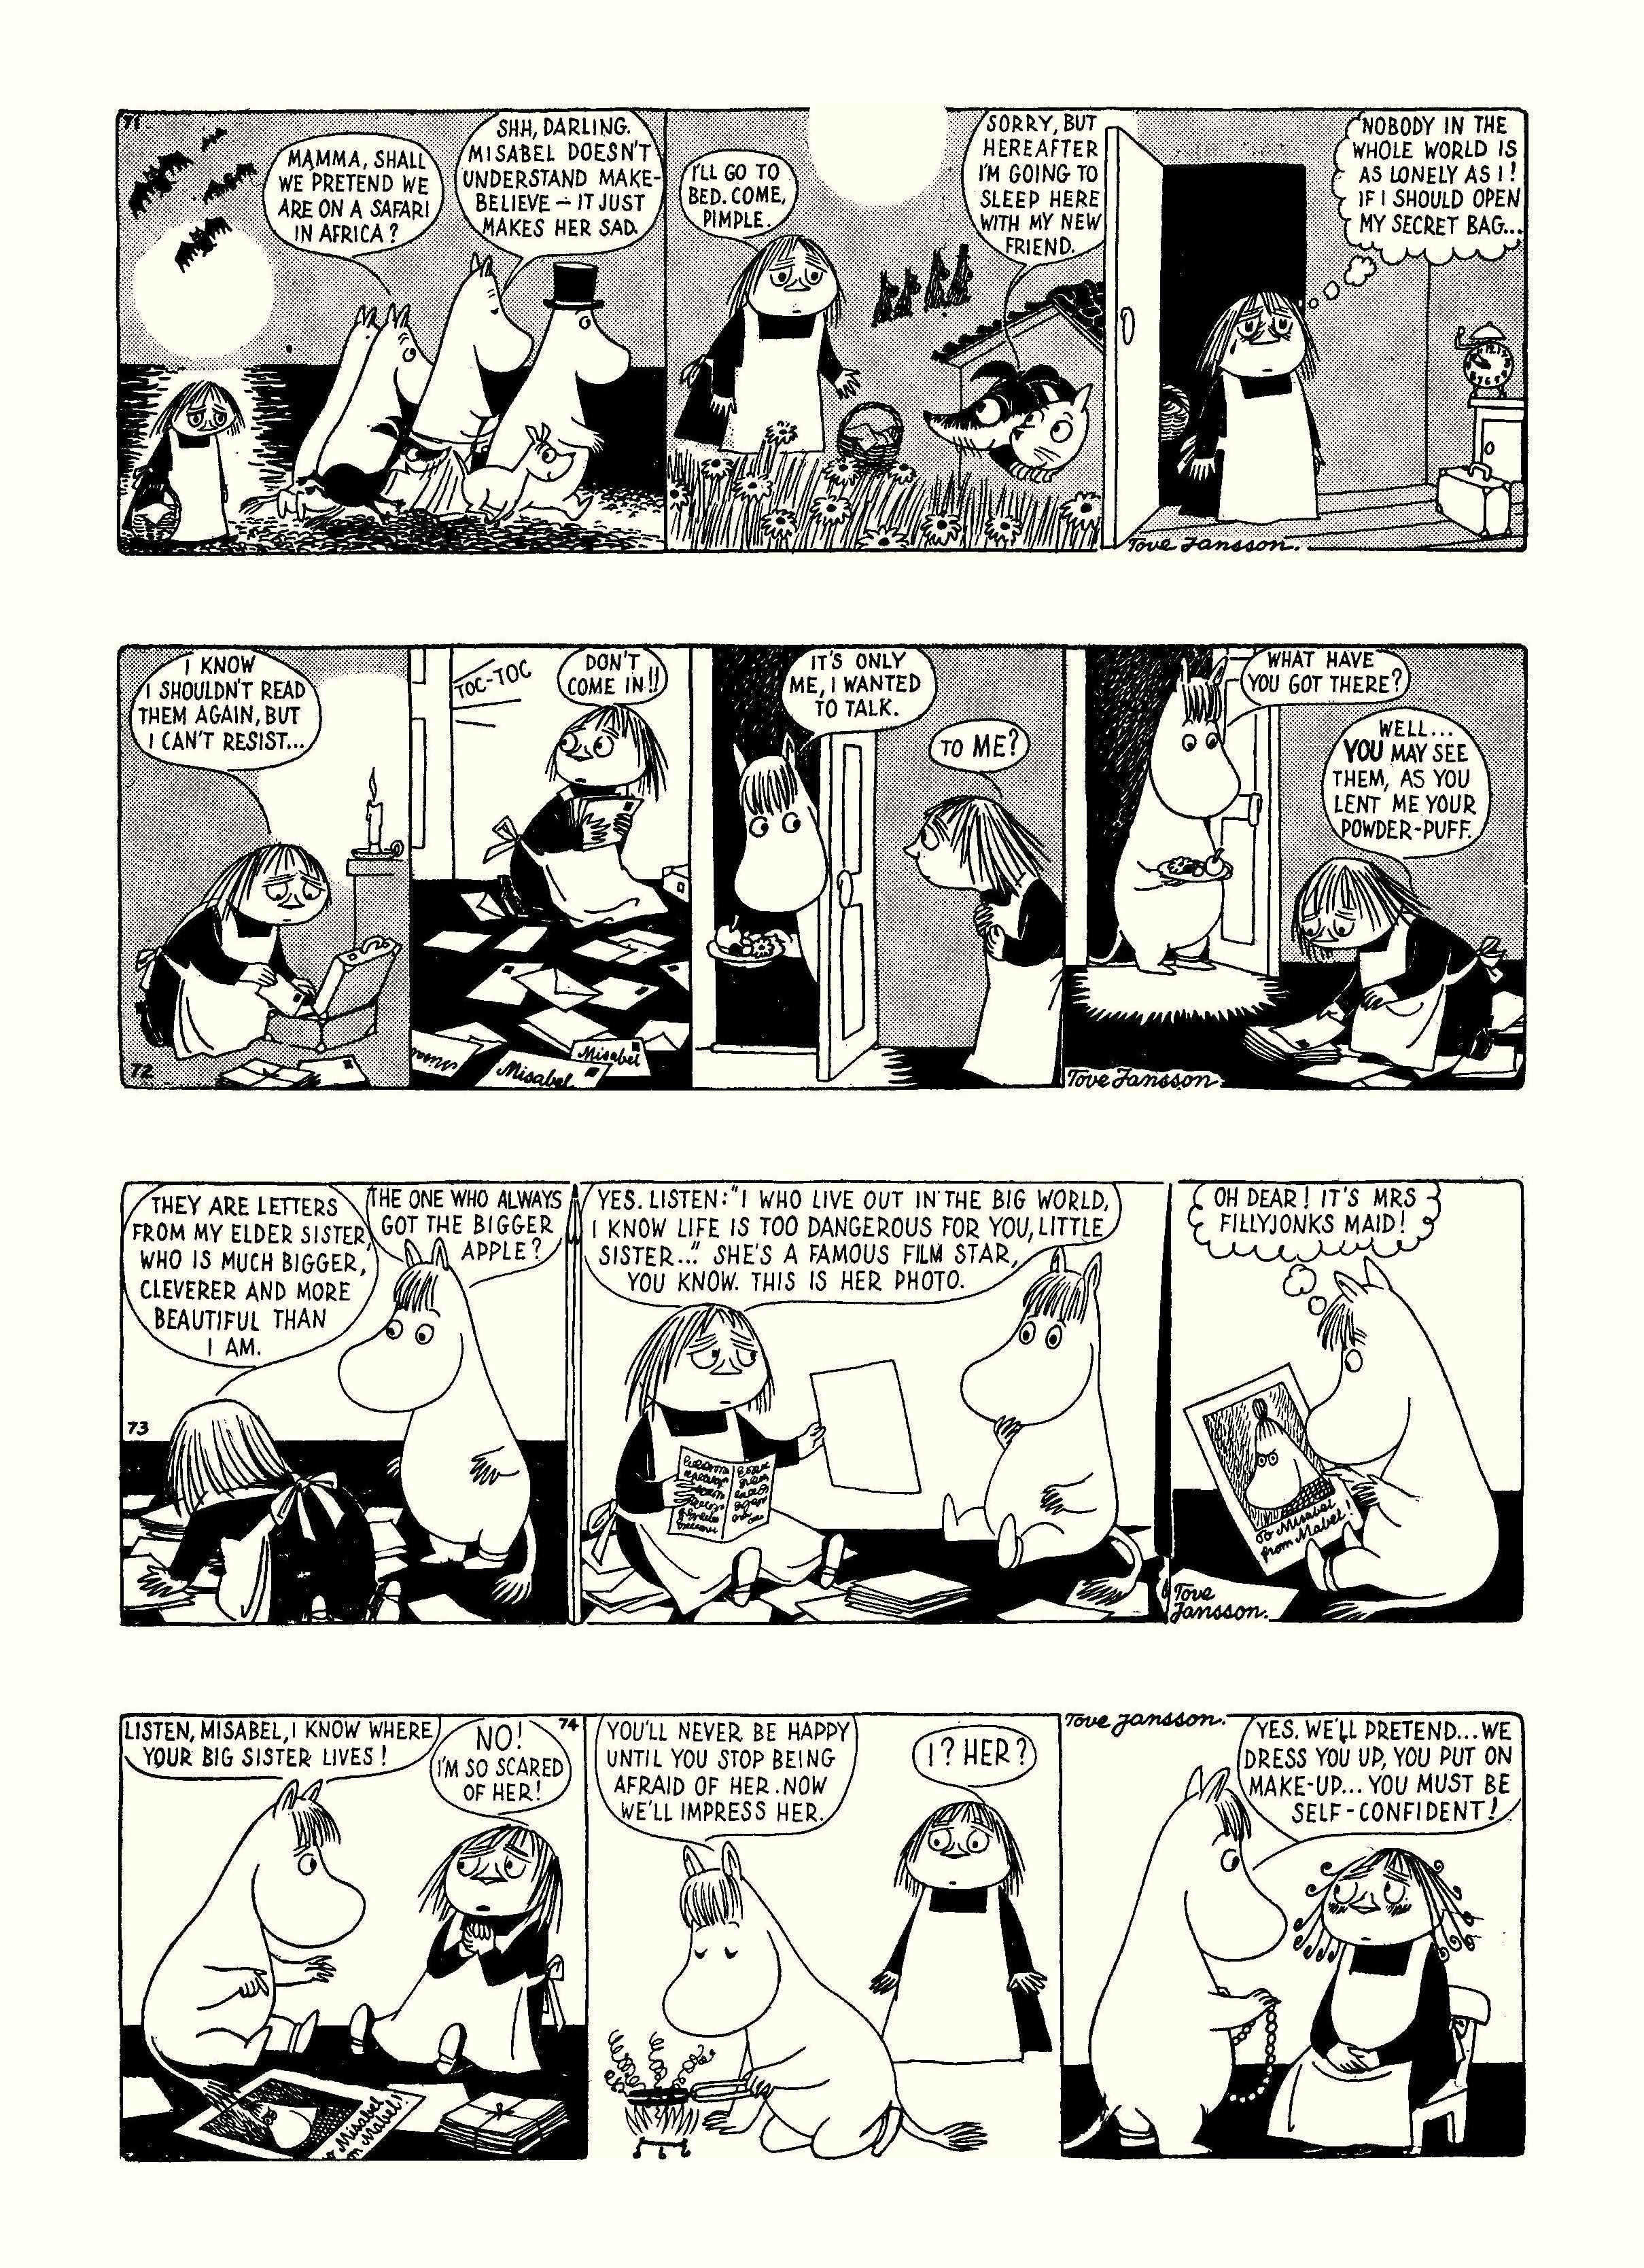 Read online Moomin: The Complete Tove Jansson Comic Strip comic -  Issue # TPB 2 - 45